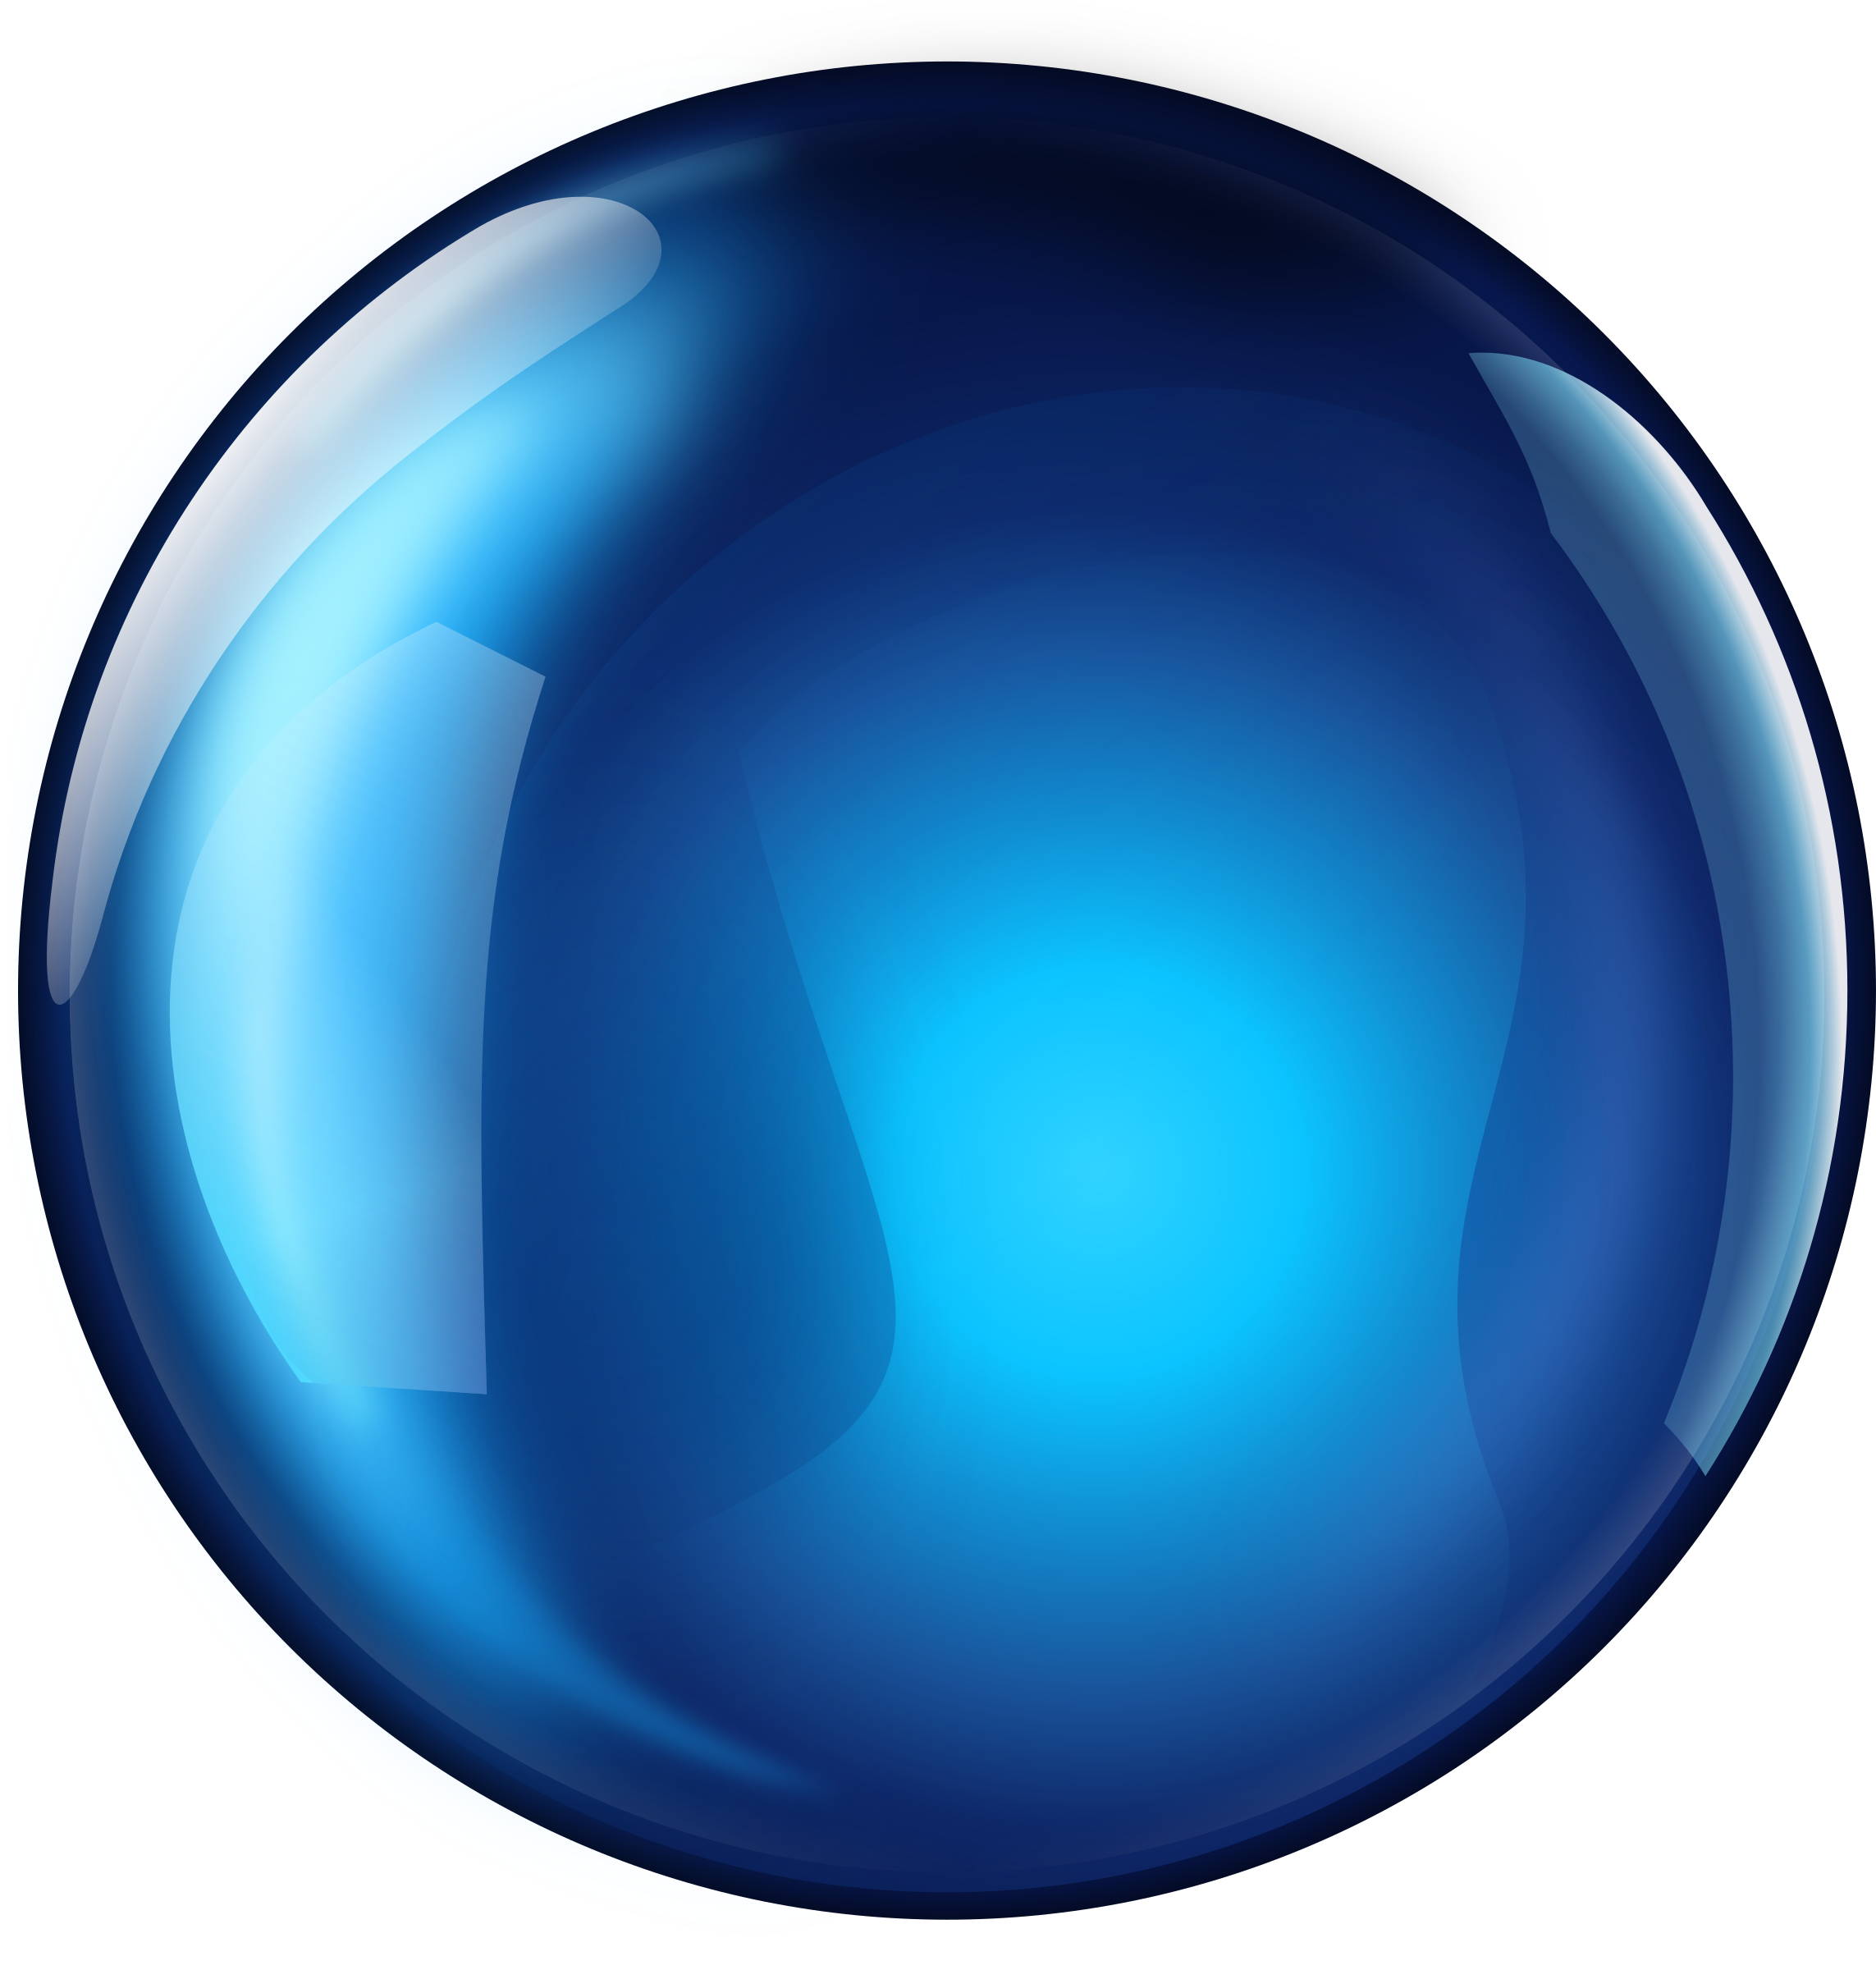 Big Image (Png) - Sphere, Transparent background PNG HD thumbnail